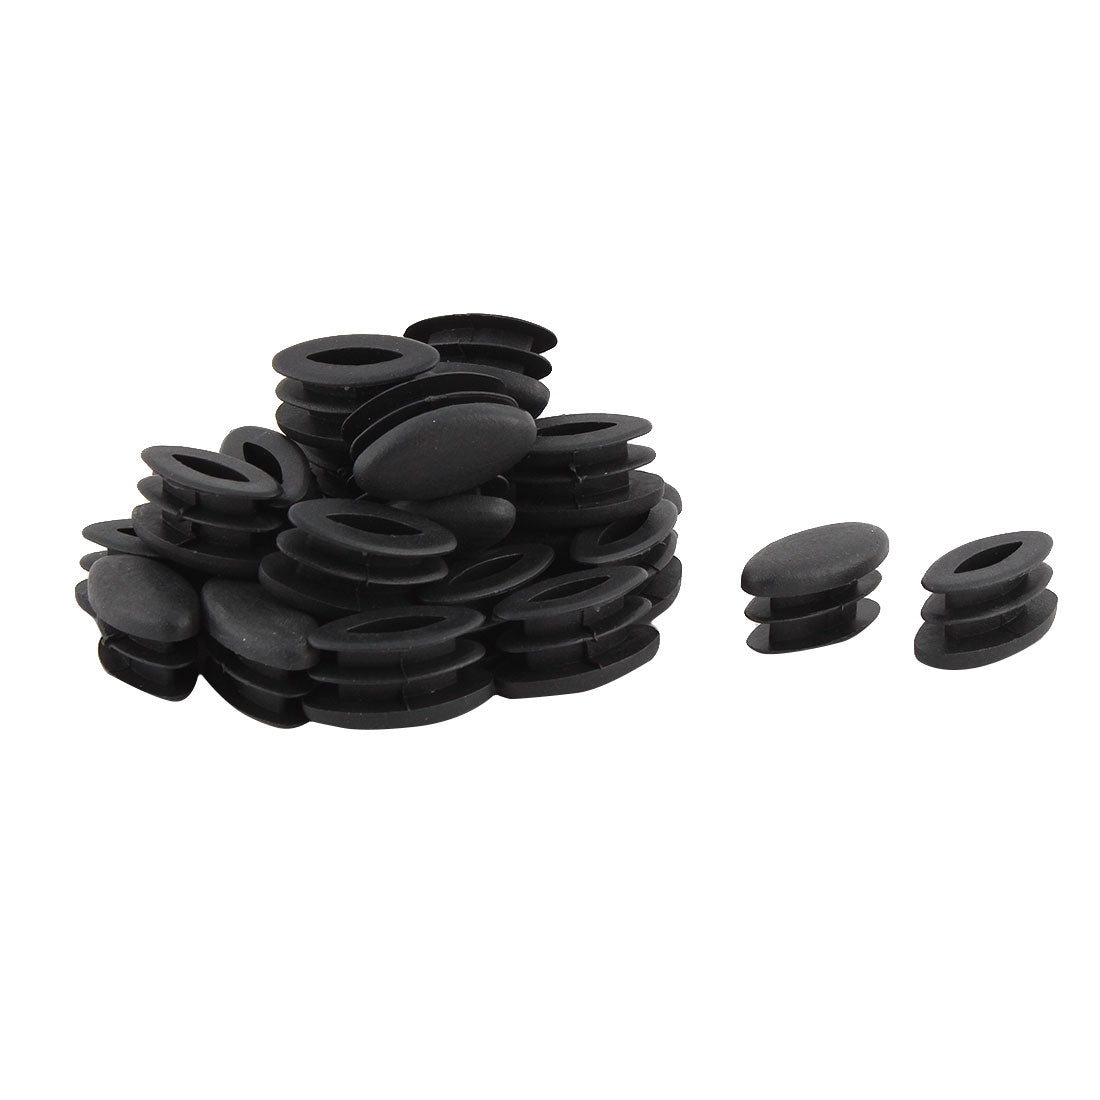 uxcell Uxcell Furniture Table Chair Plastic Oval Design Tube Insert Cap Black 15 x 30mm 30 PCS